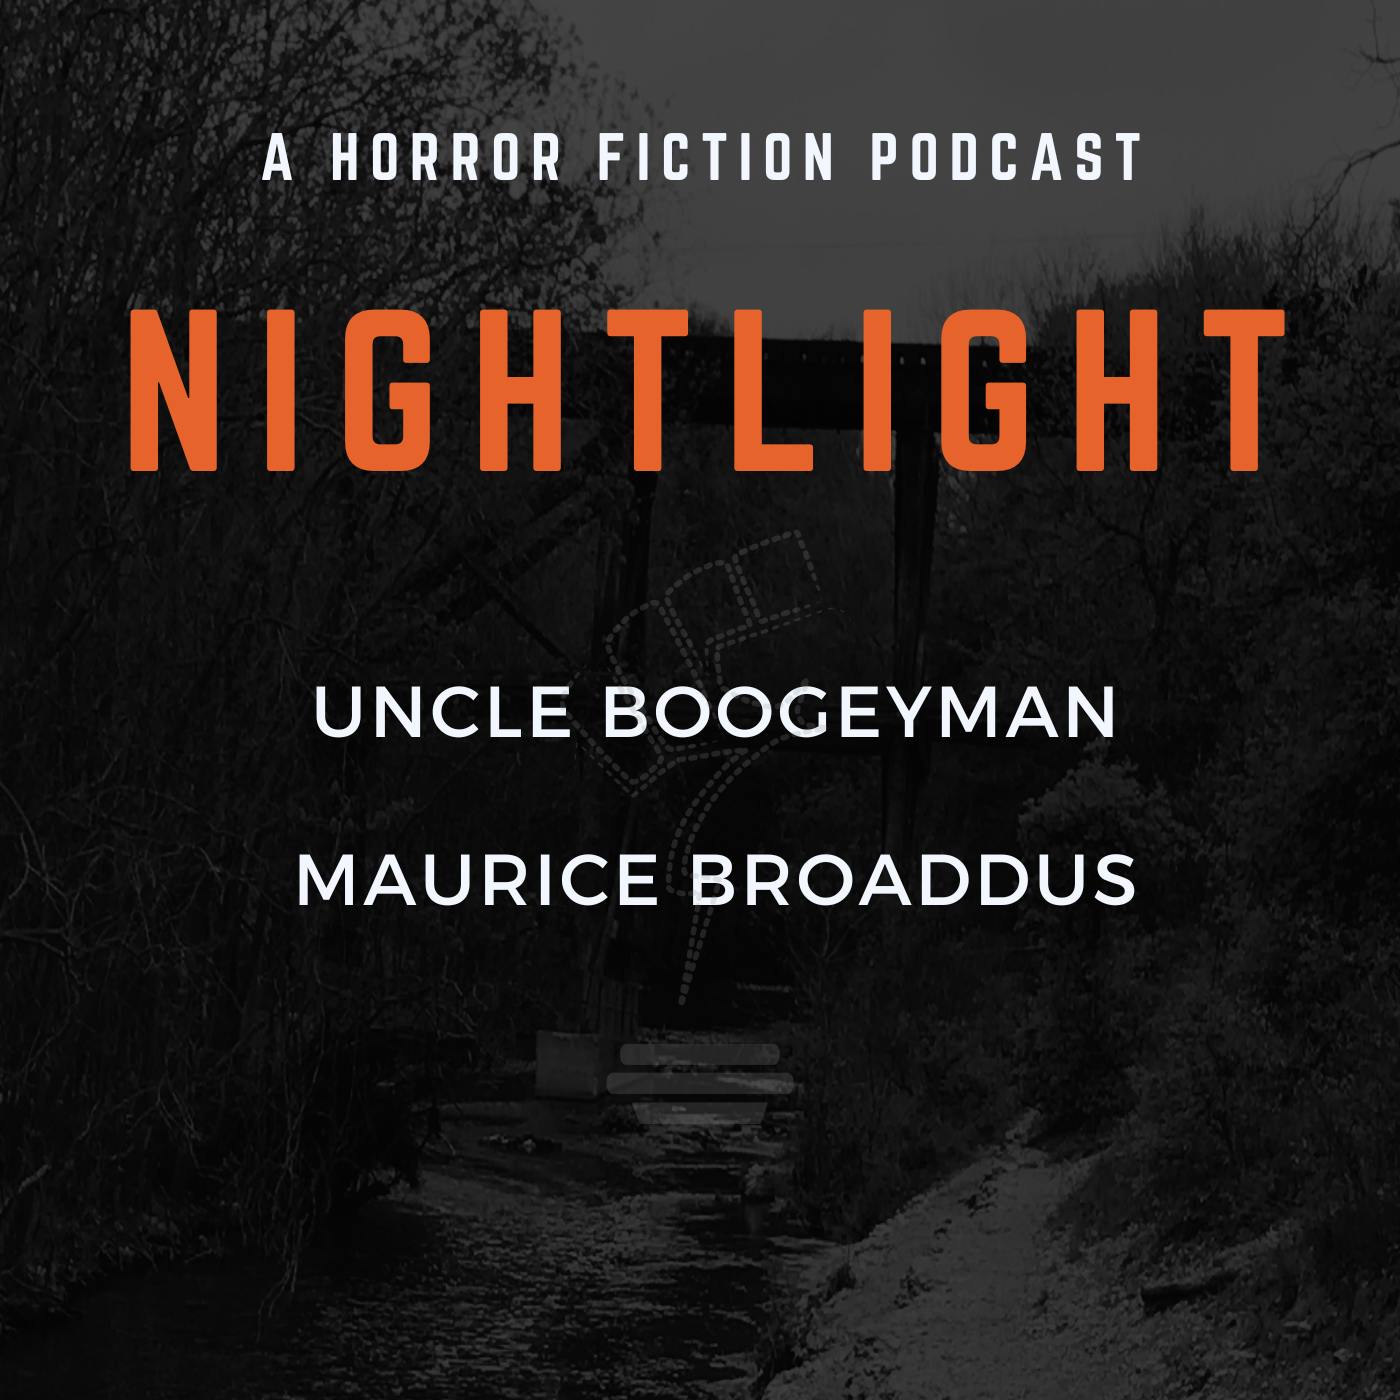 620: Uncle Boogeyman by Maurice Broaddus